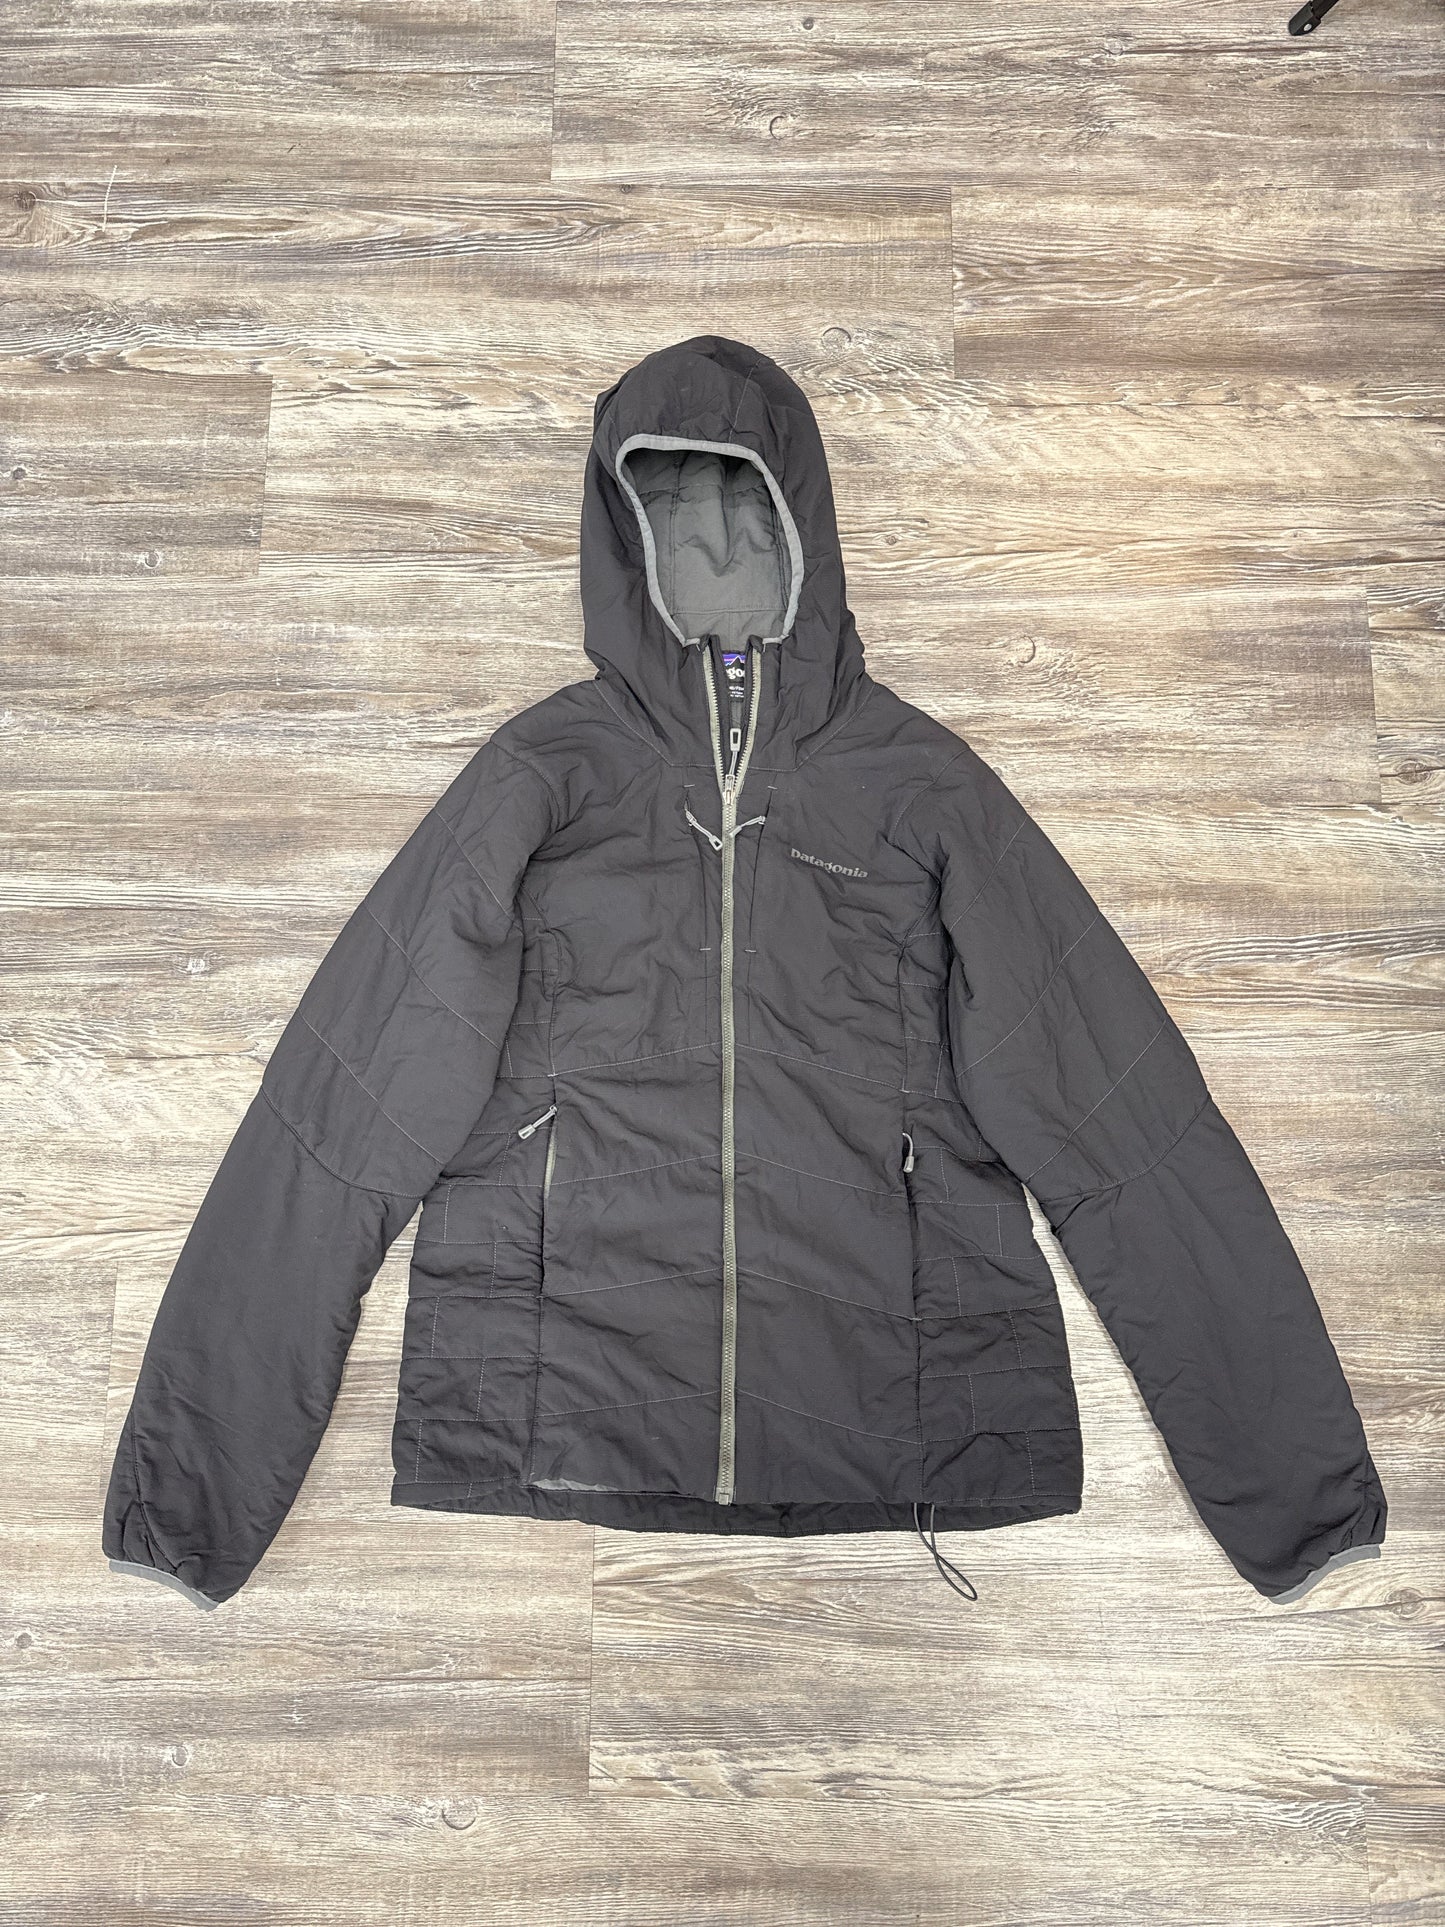 Black Jacket Puffer & Quilted Patagonia, Size M